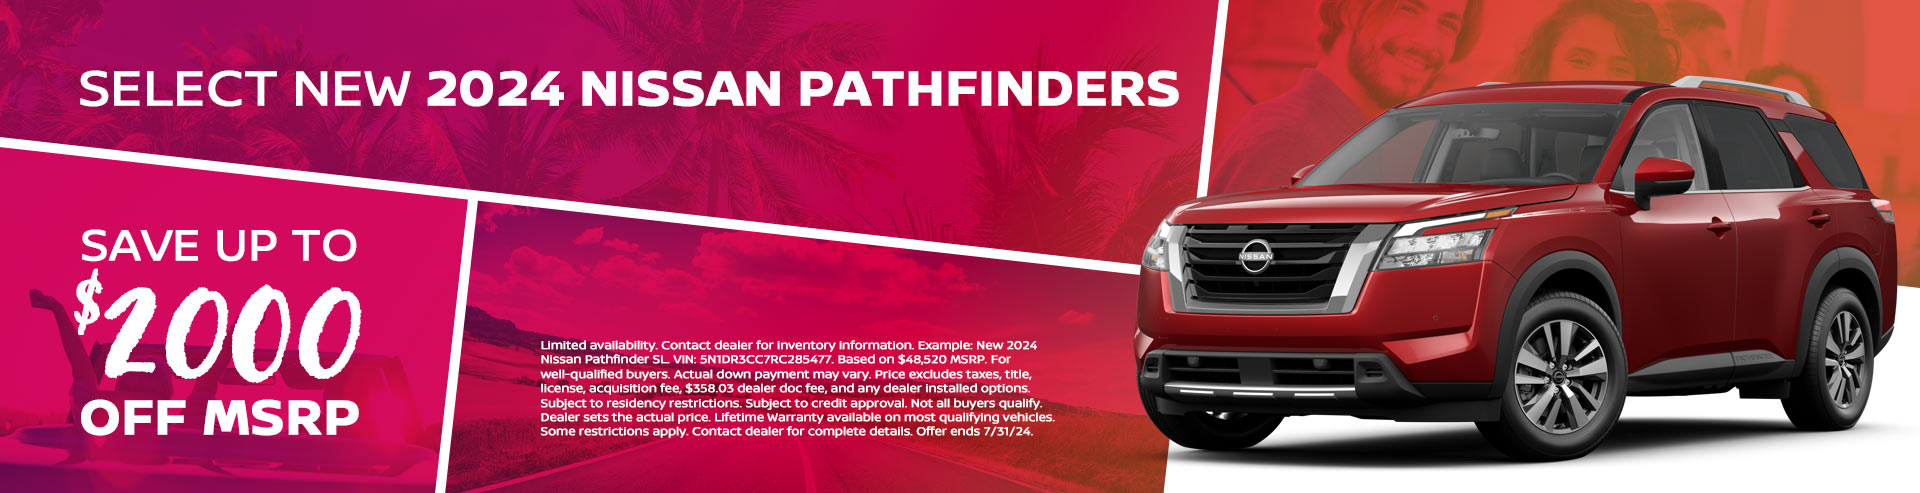 Save up to $2,000 off MSRP on select New 2024 Nissan Pathfinders